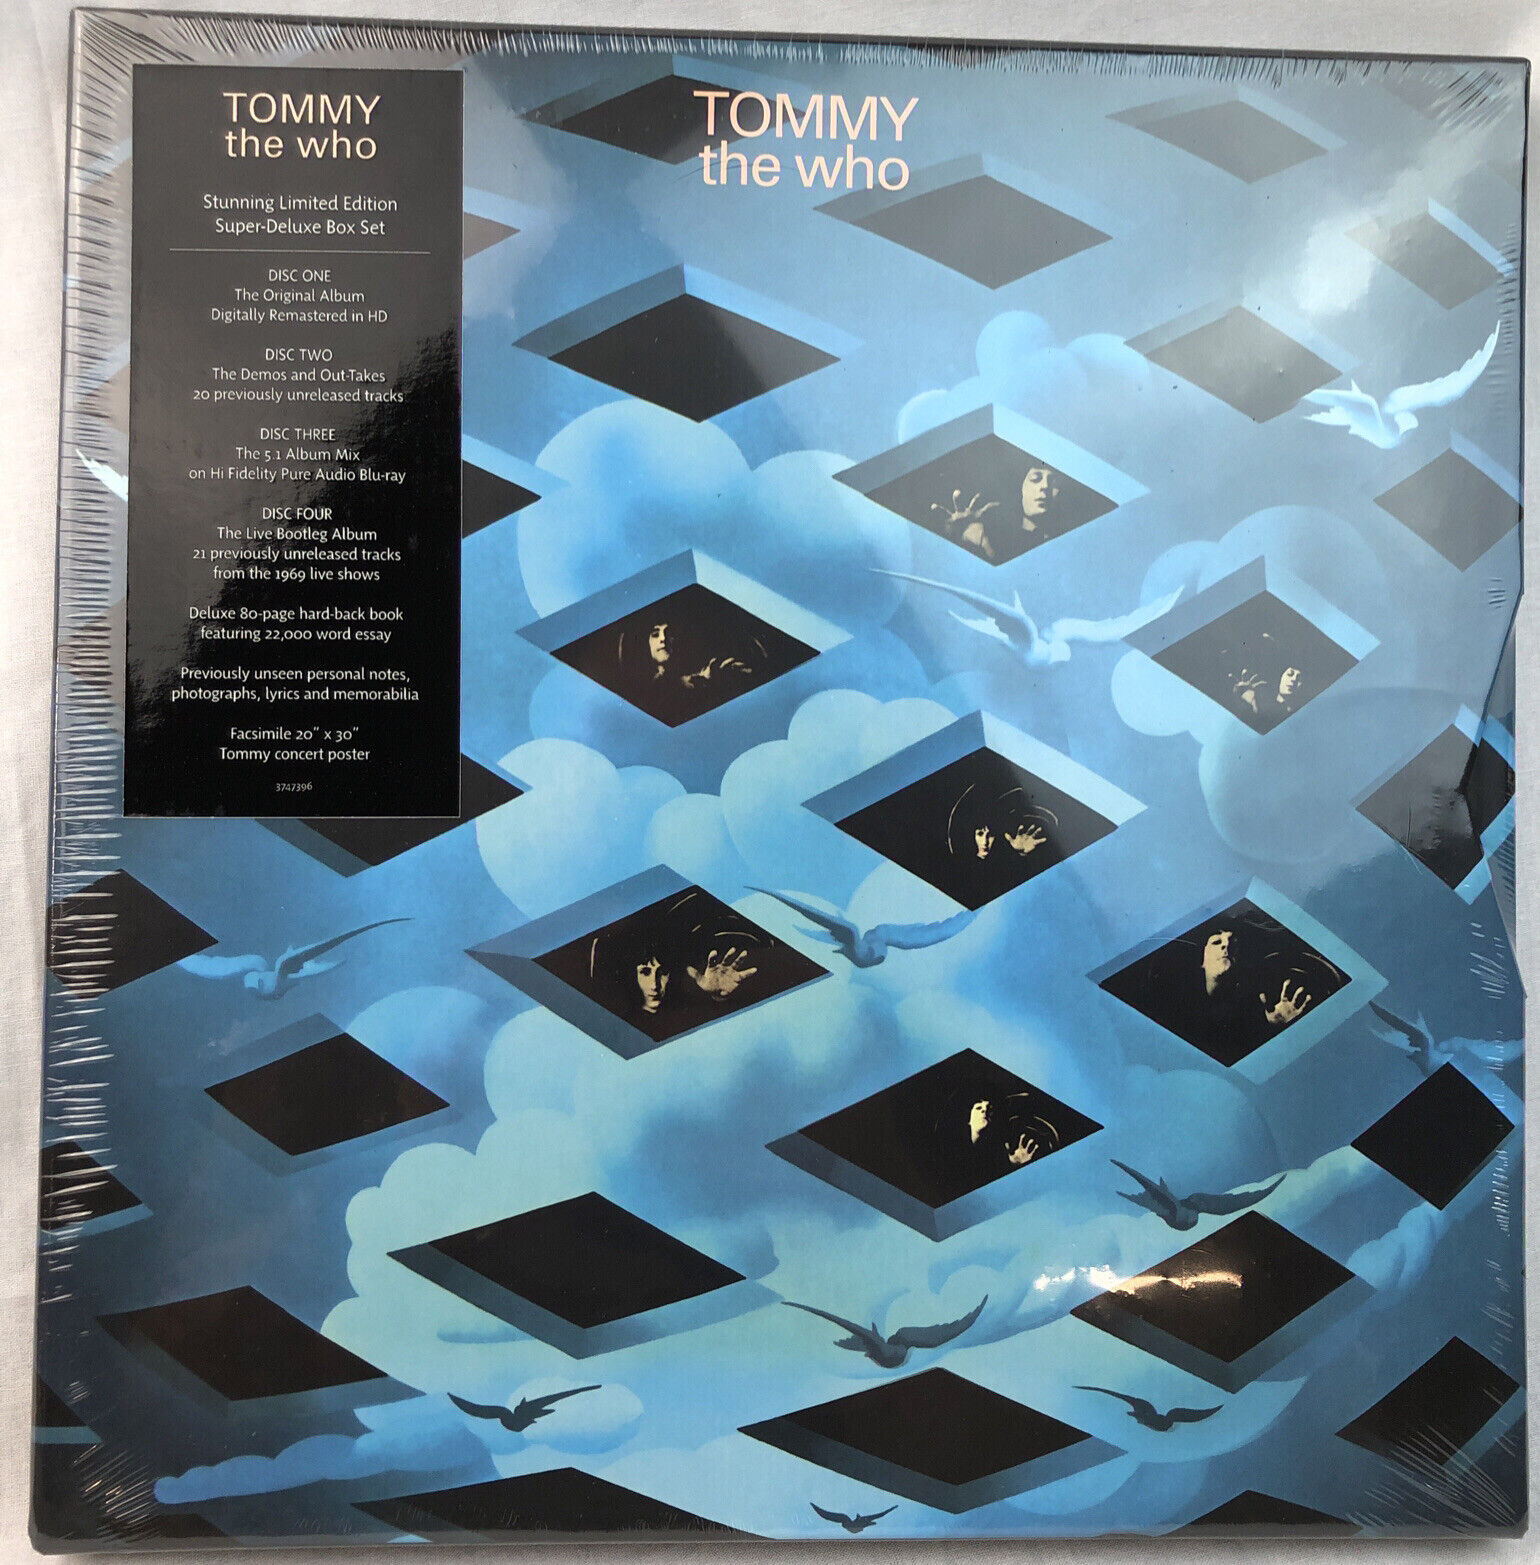 “NEW” THE WHO Tommy 2013 POLYDOR Super Deluxe Box Set 3 CD & 1 Blu-ray & Poster